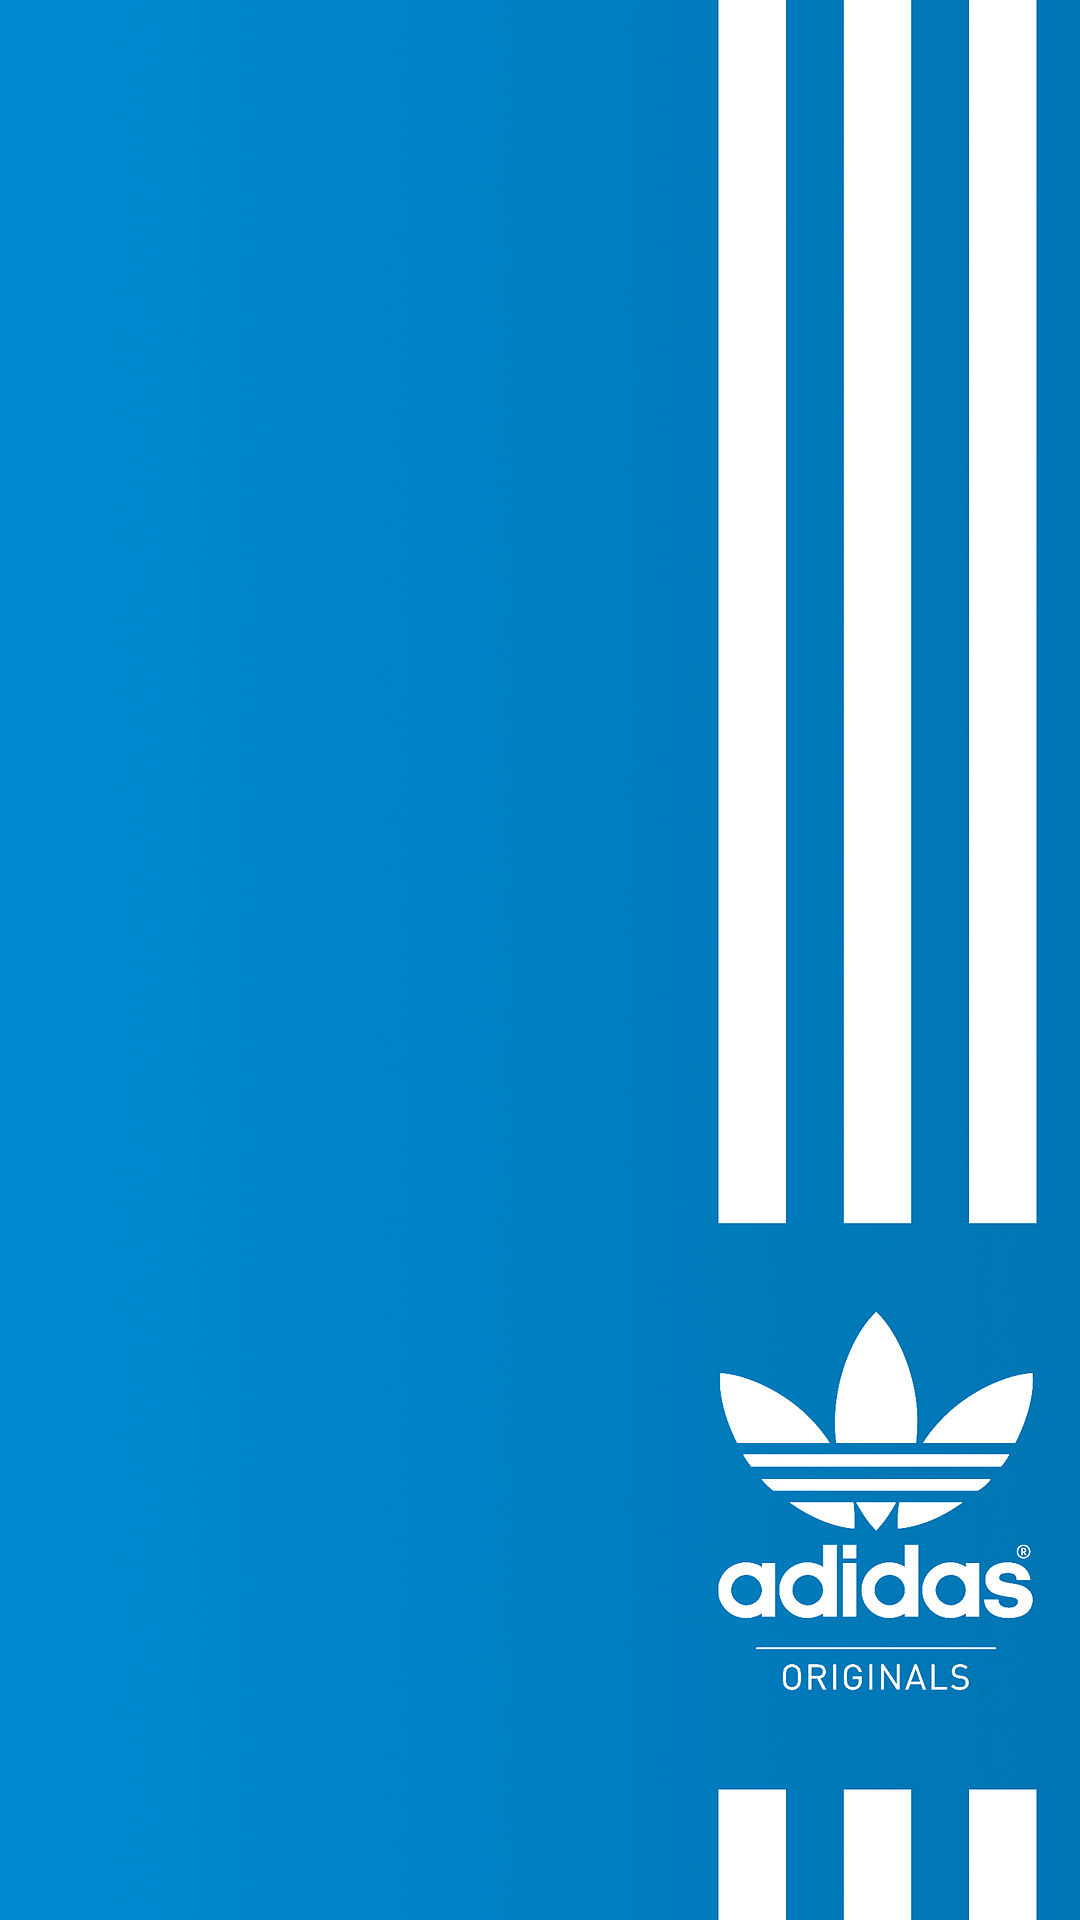 Adidas Background For iPhone Wallpaperask